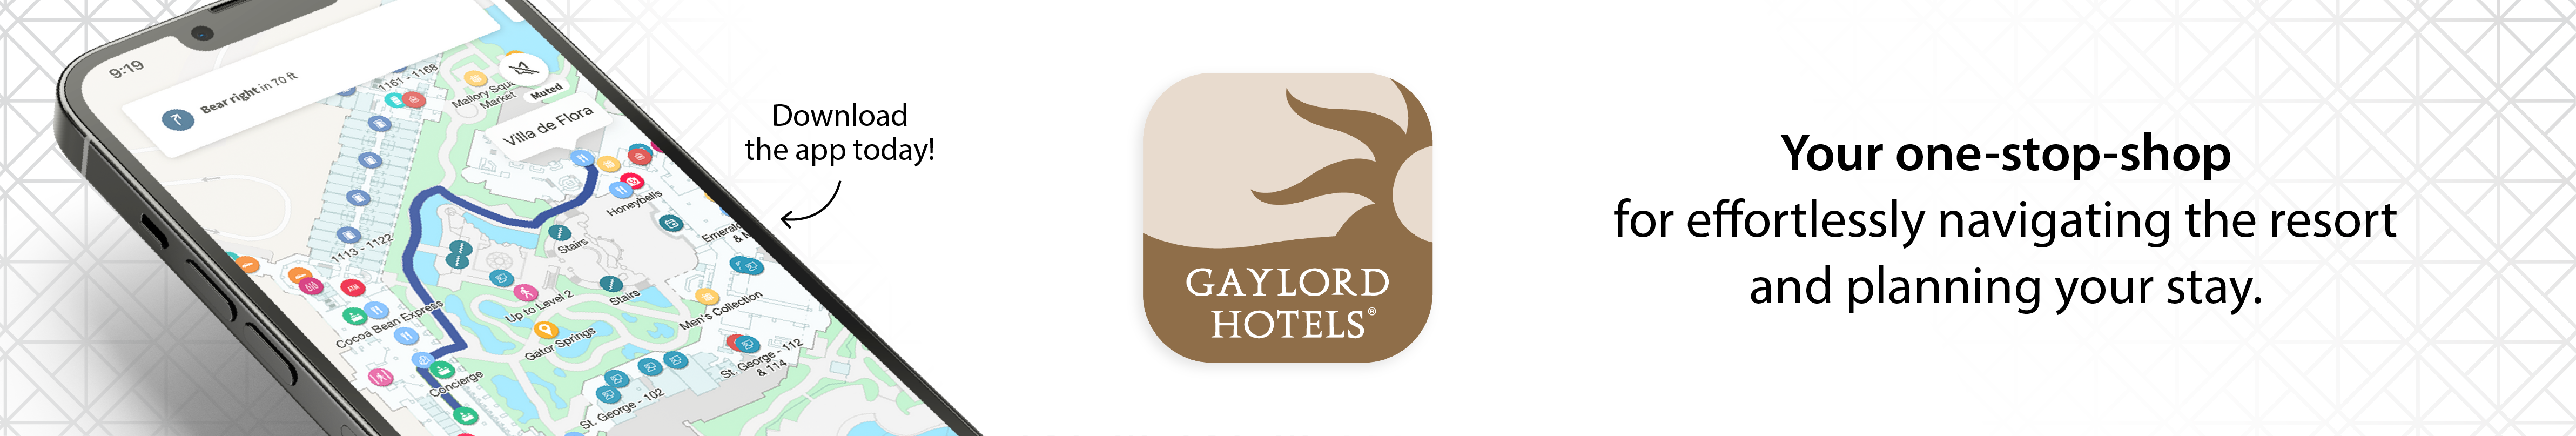 Gaylord Hotels App